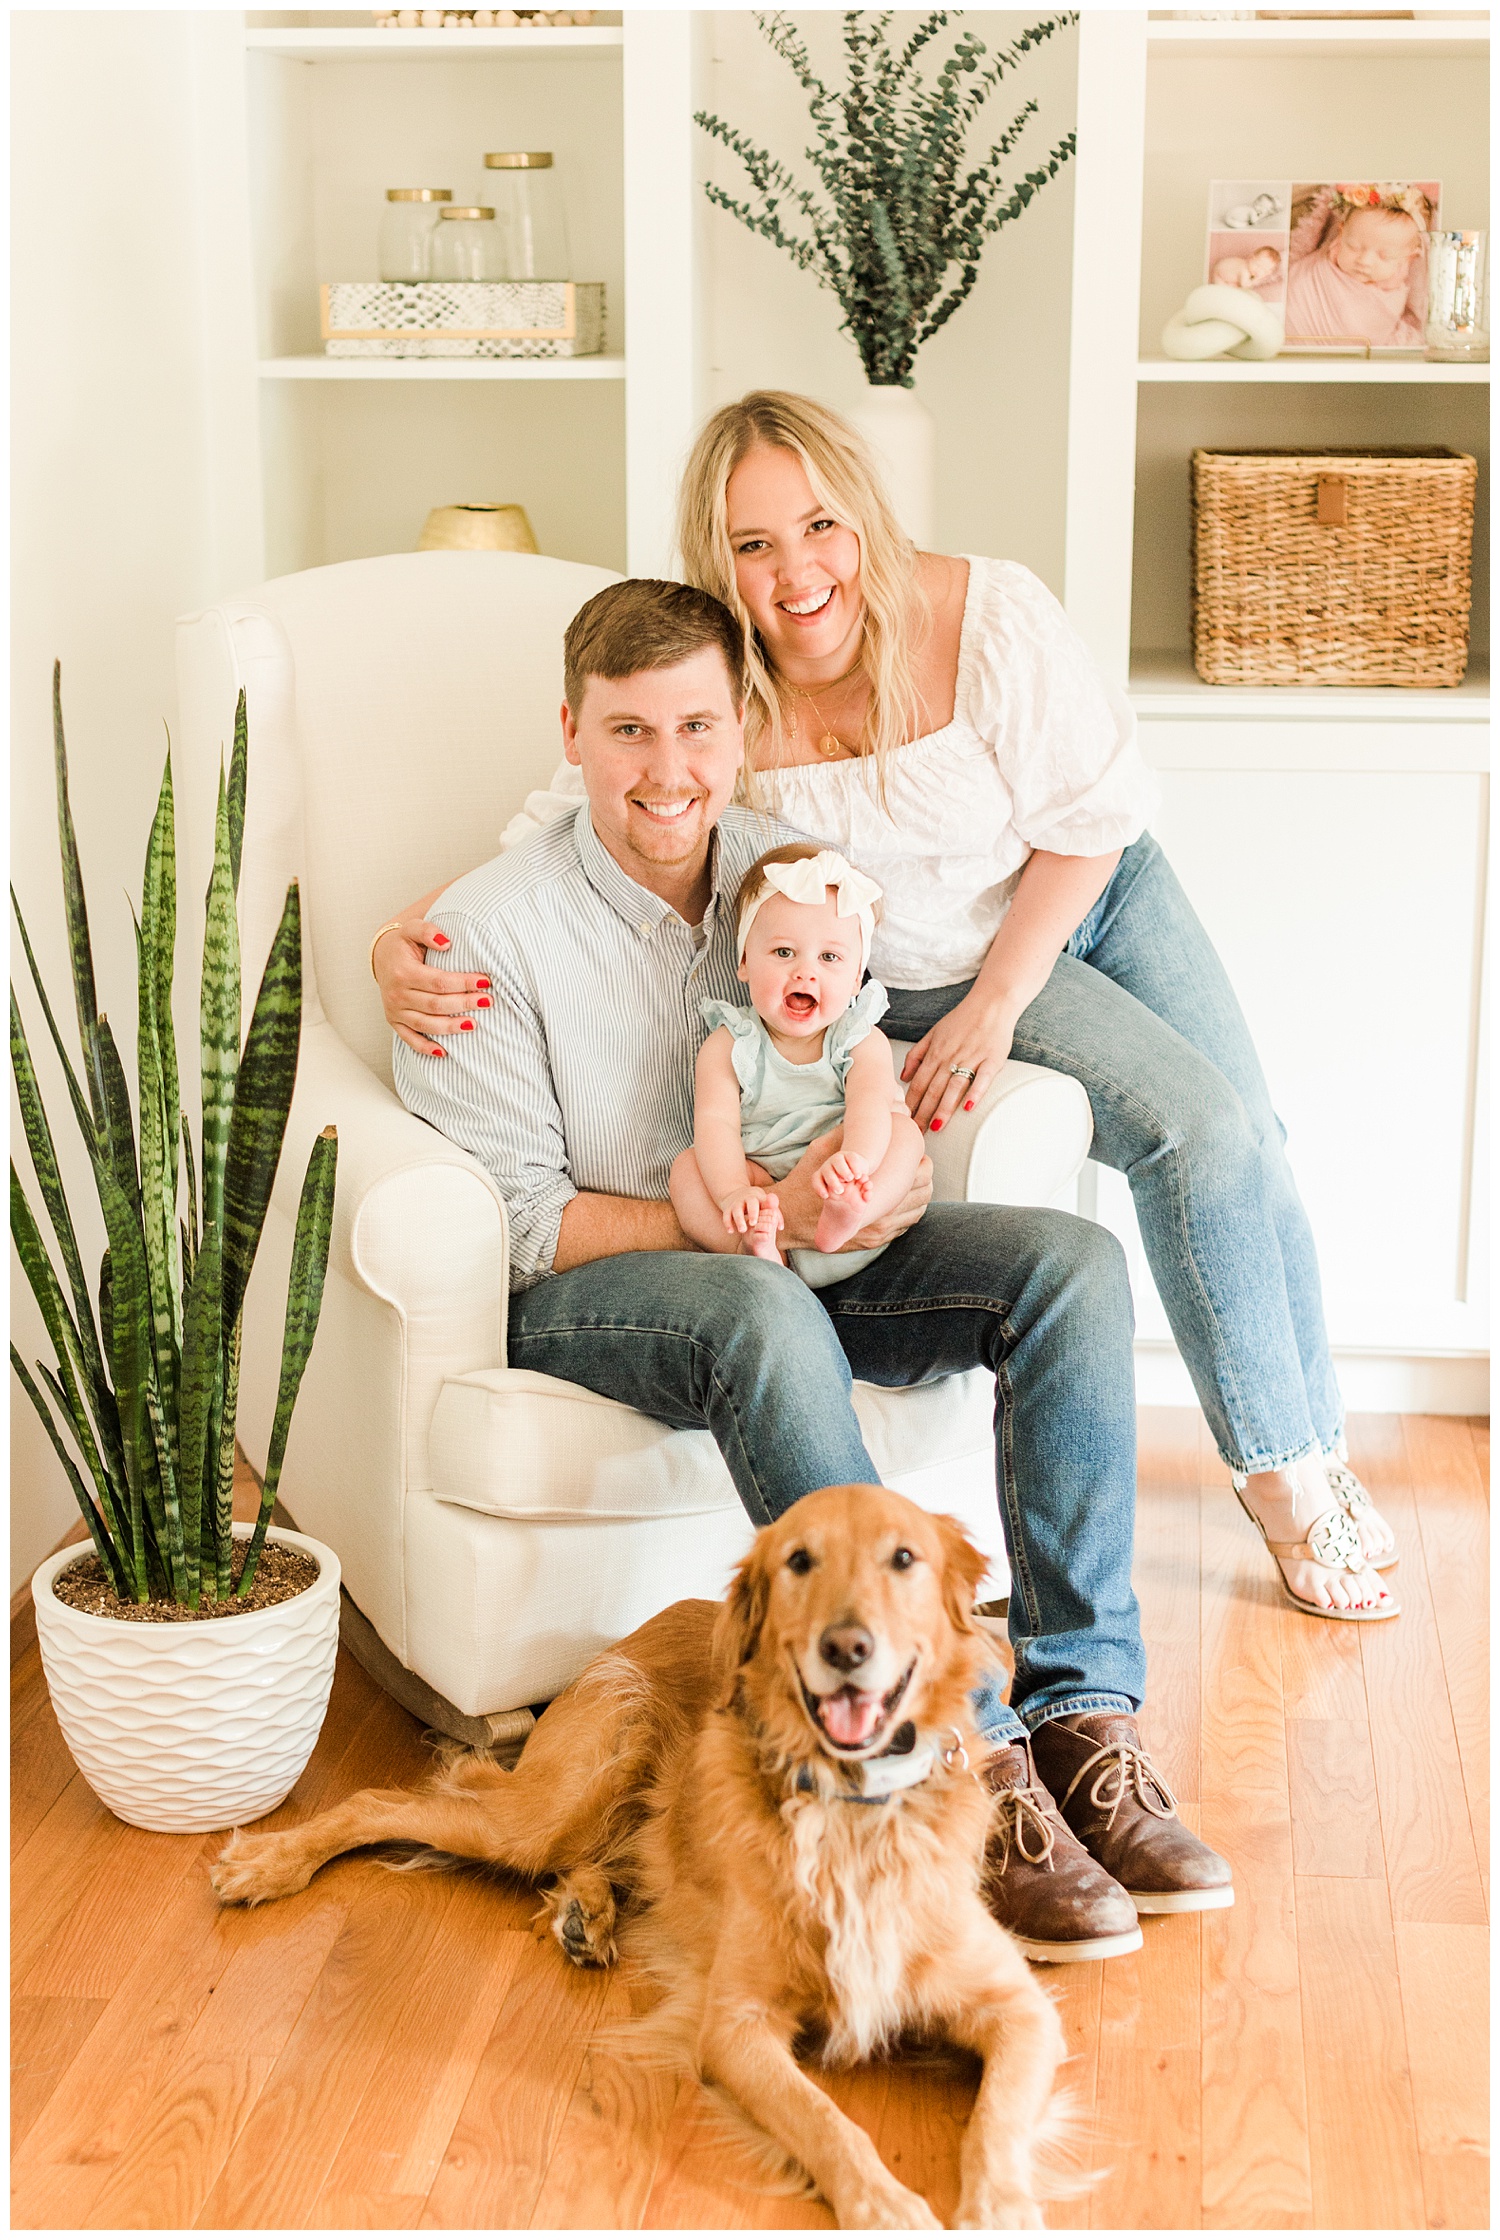 The Bollig family snuggles together in their light and bright living room | CB Studio